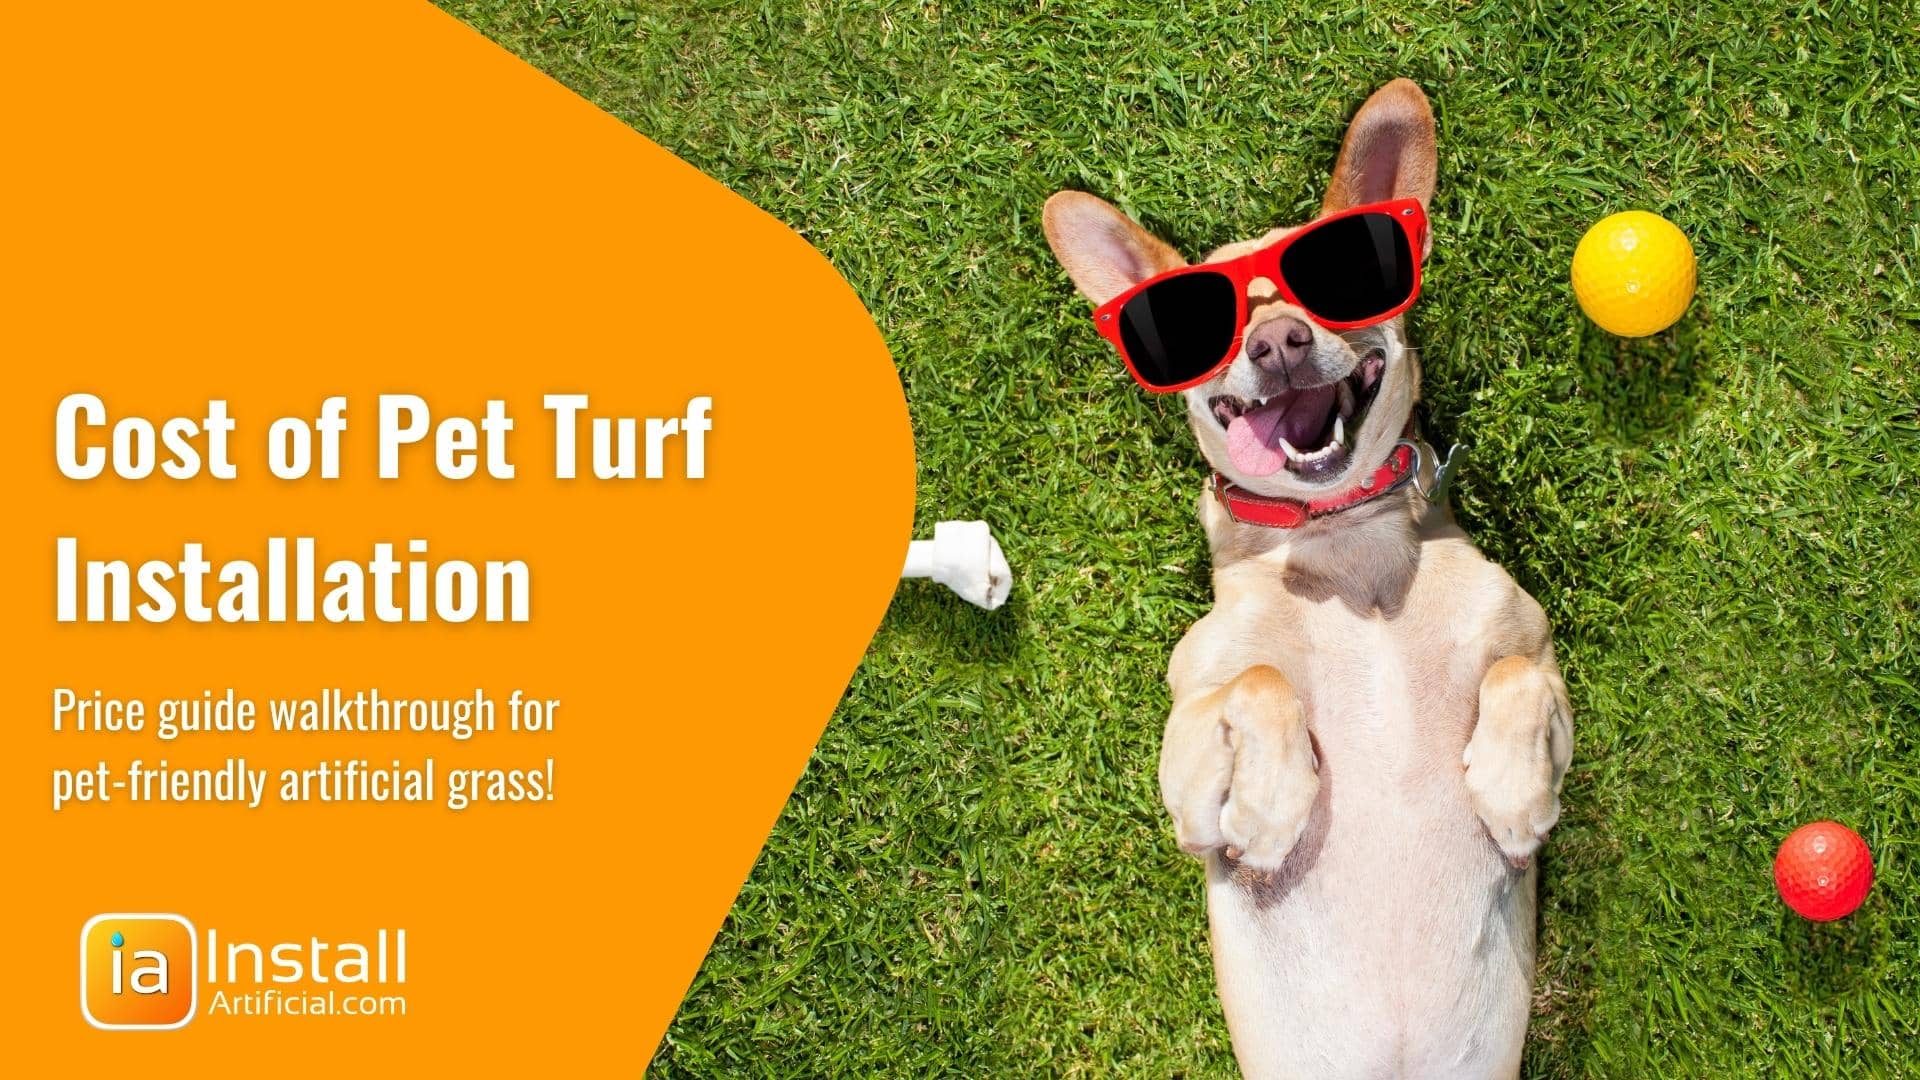 How Much Does it Cost to Install Pet Turf: 2022 Price Guide